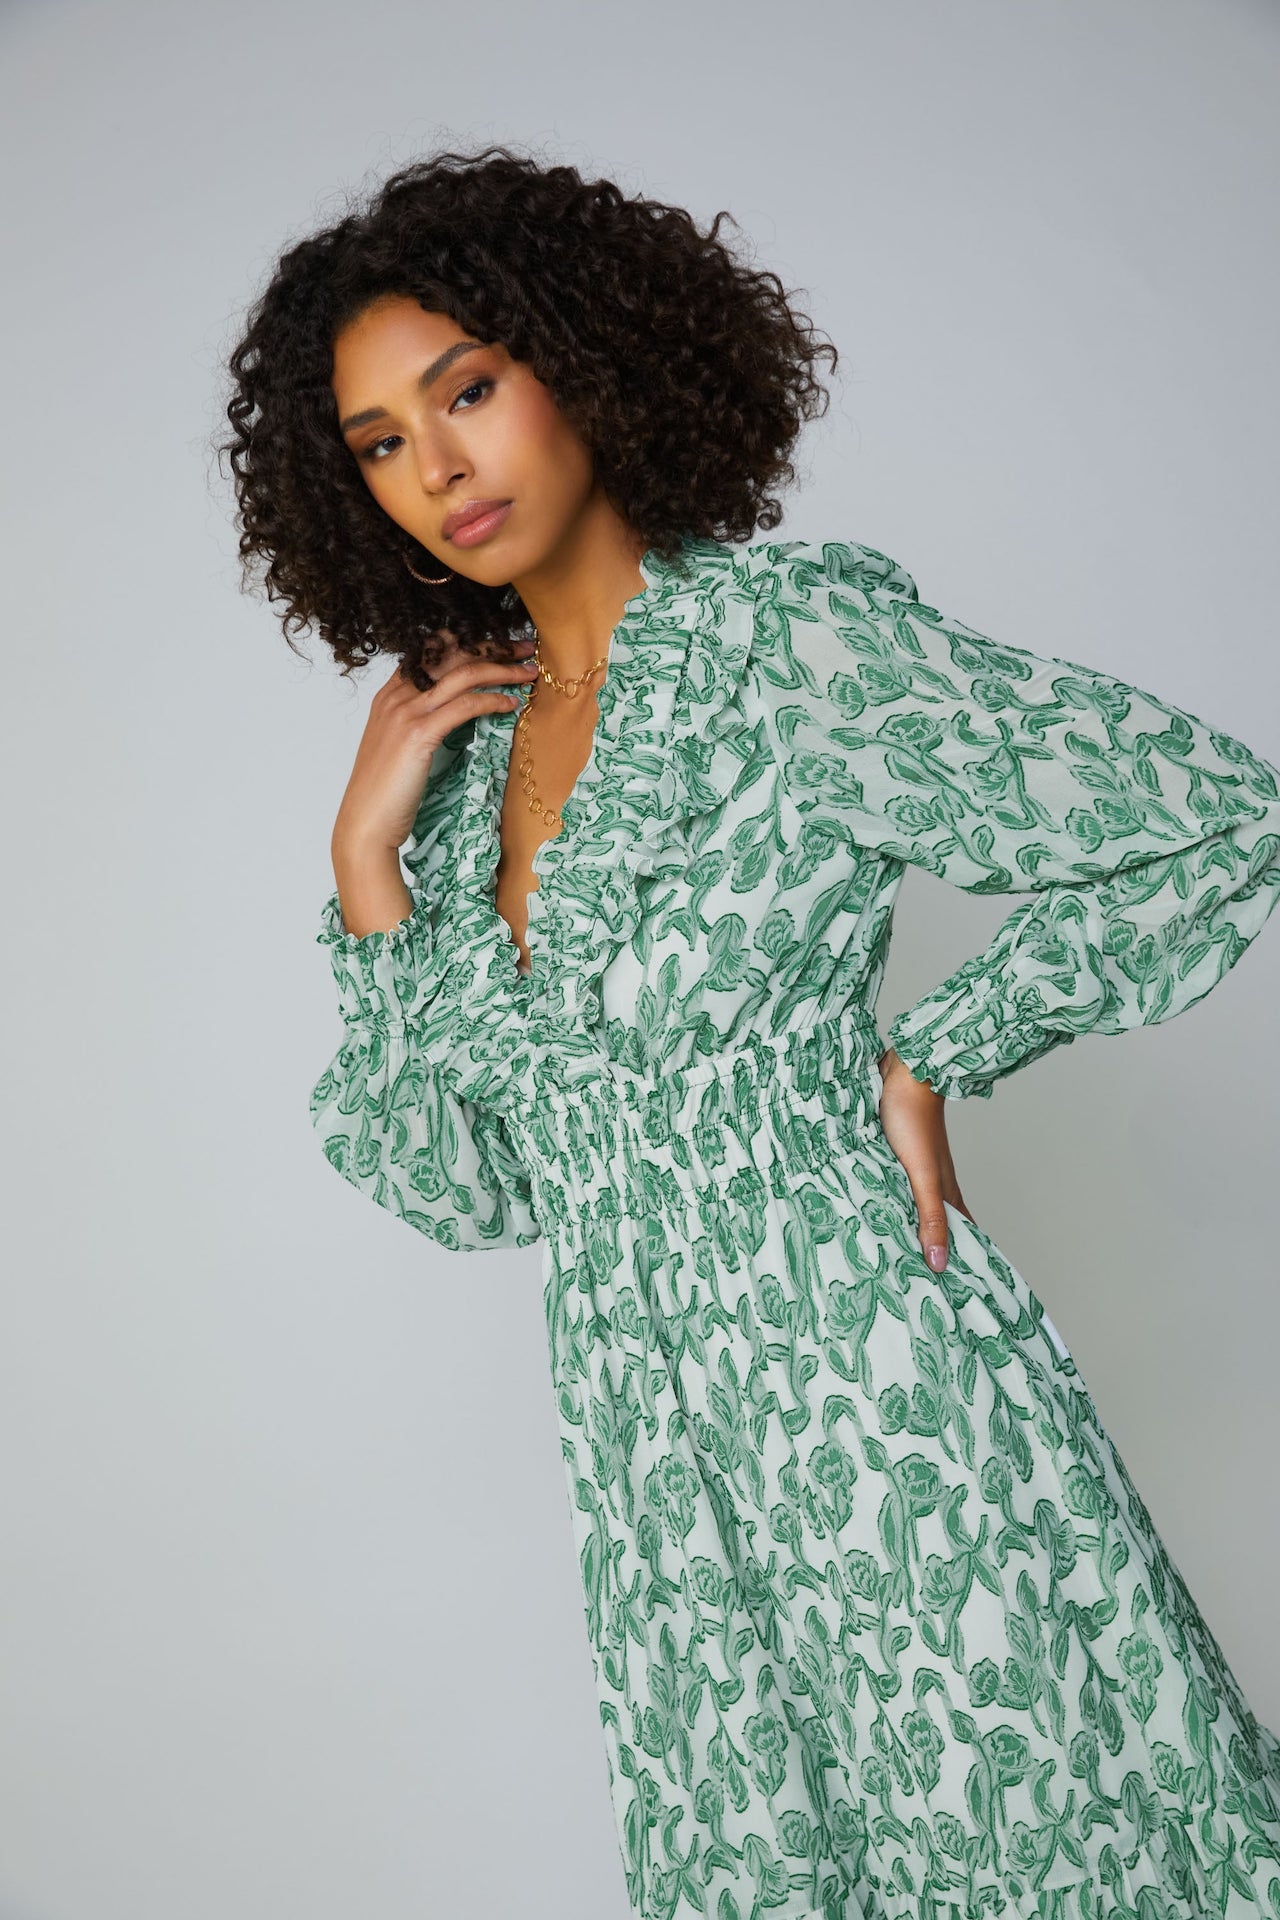 green and white Jacquard midi dress with long sleeves